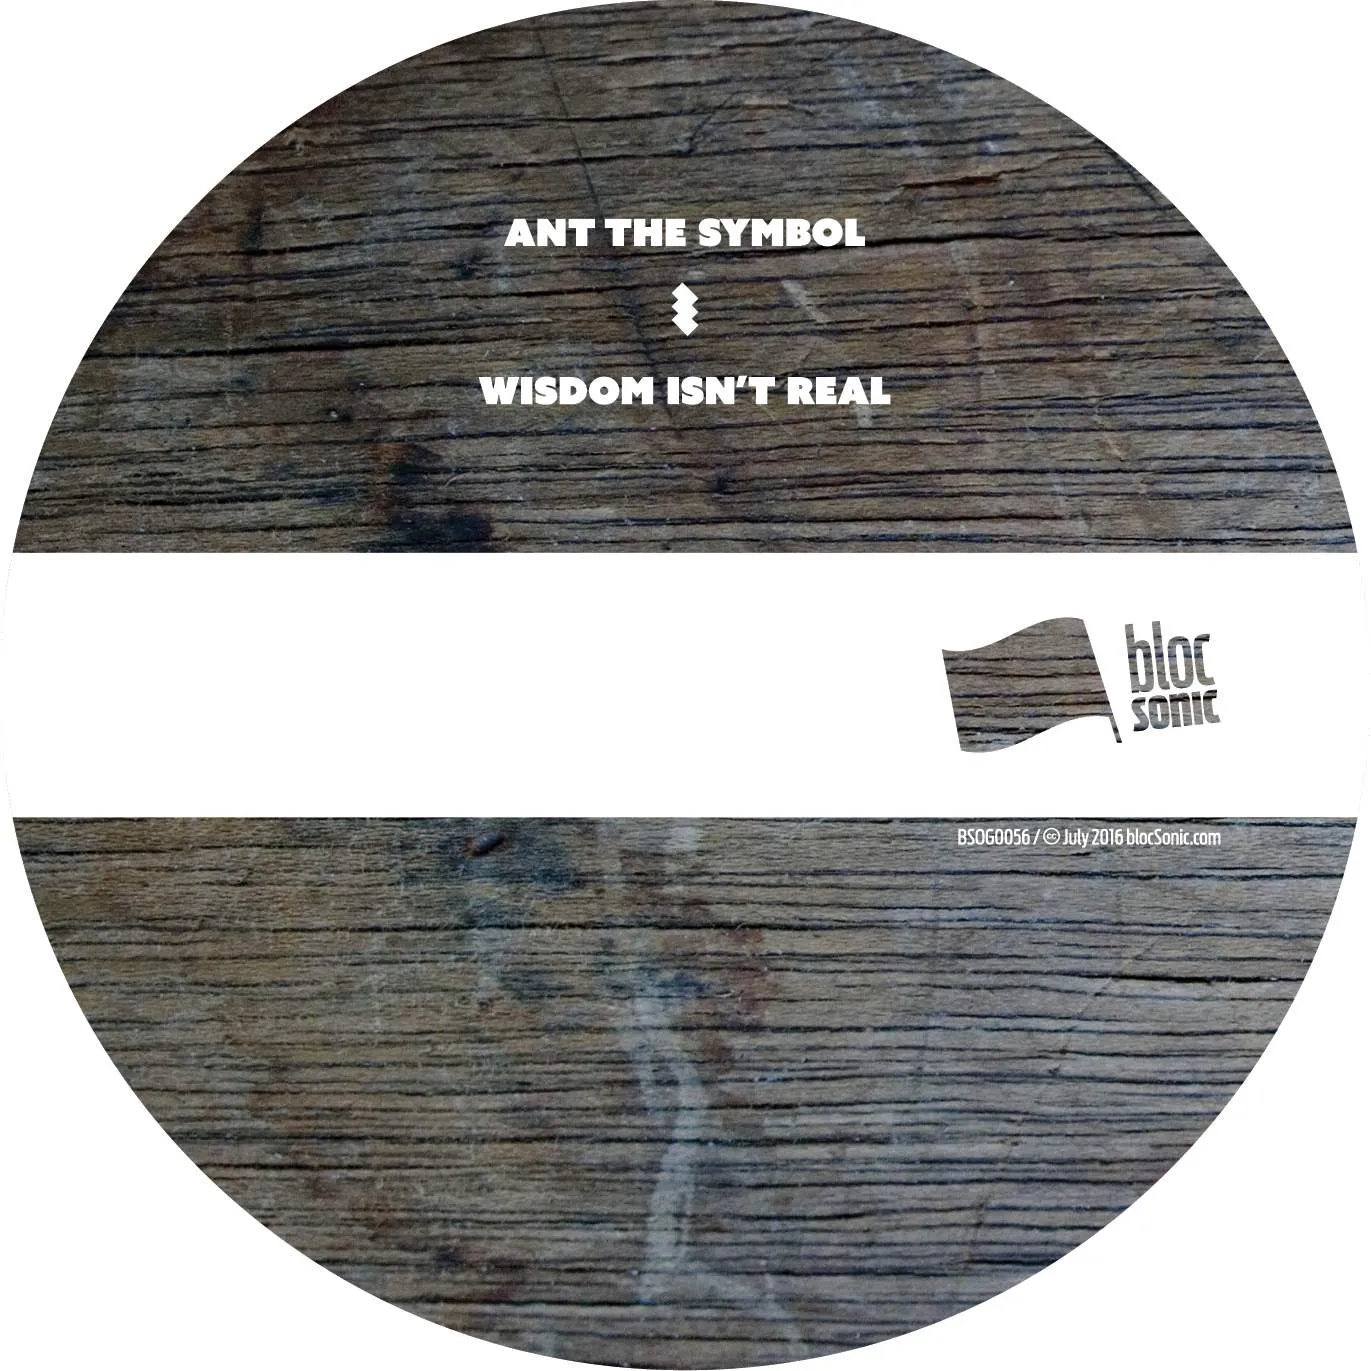 Album disc for “Wisdom Isn't Real” by Ant The Symbol